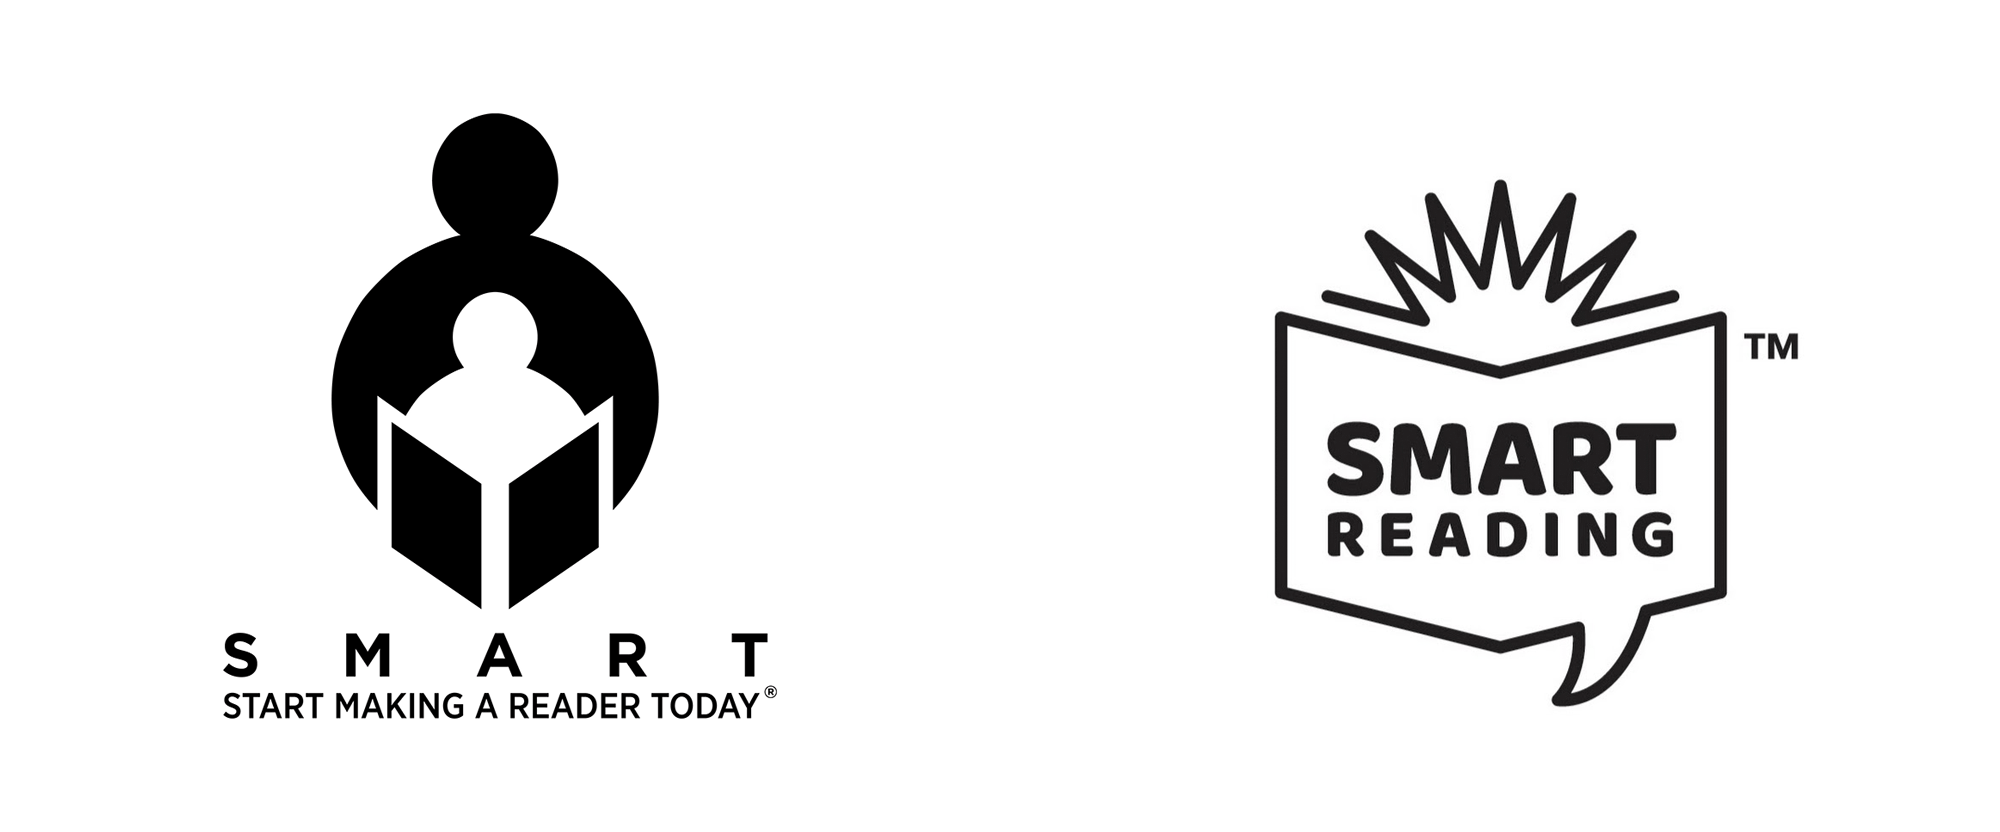 New Name and Logo for SMART Reading